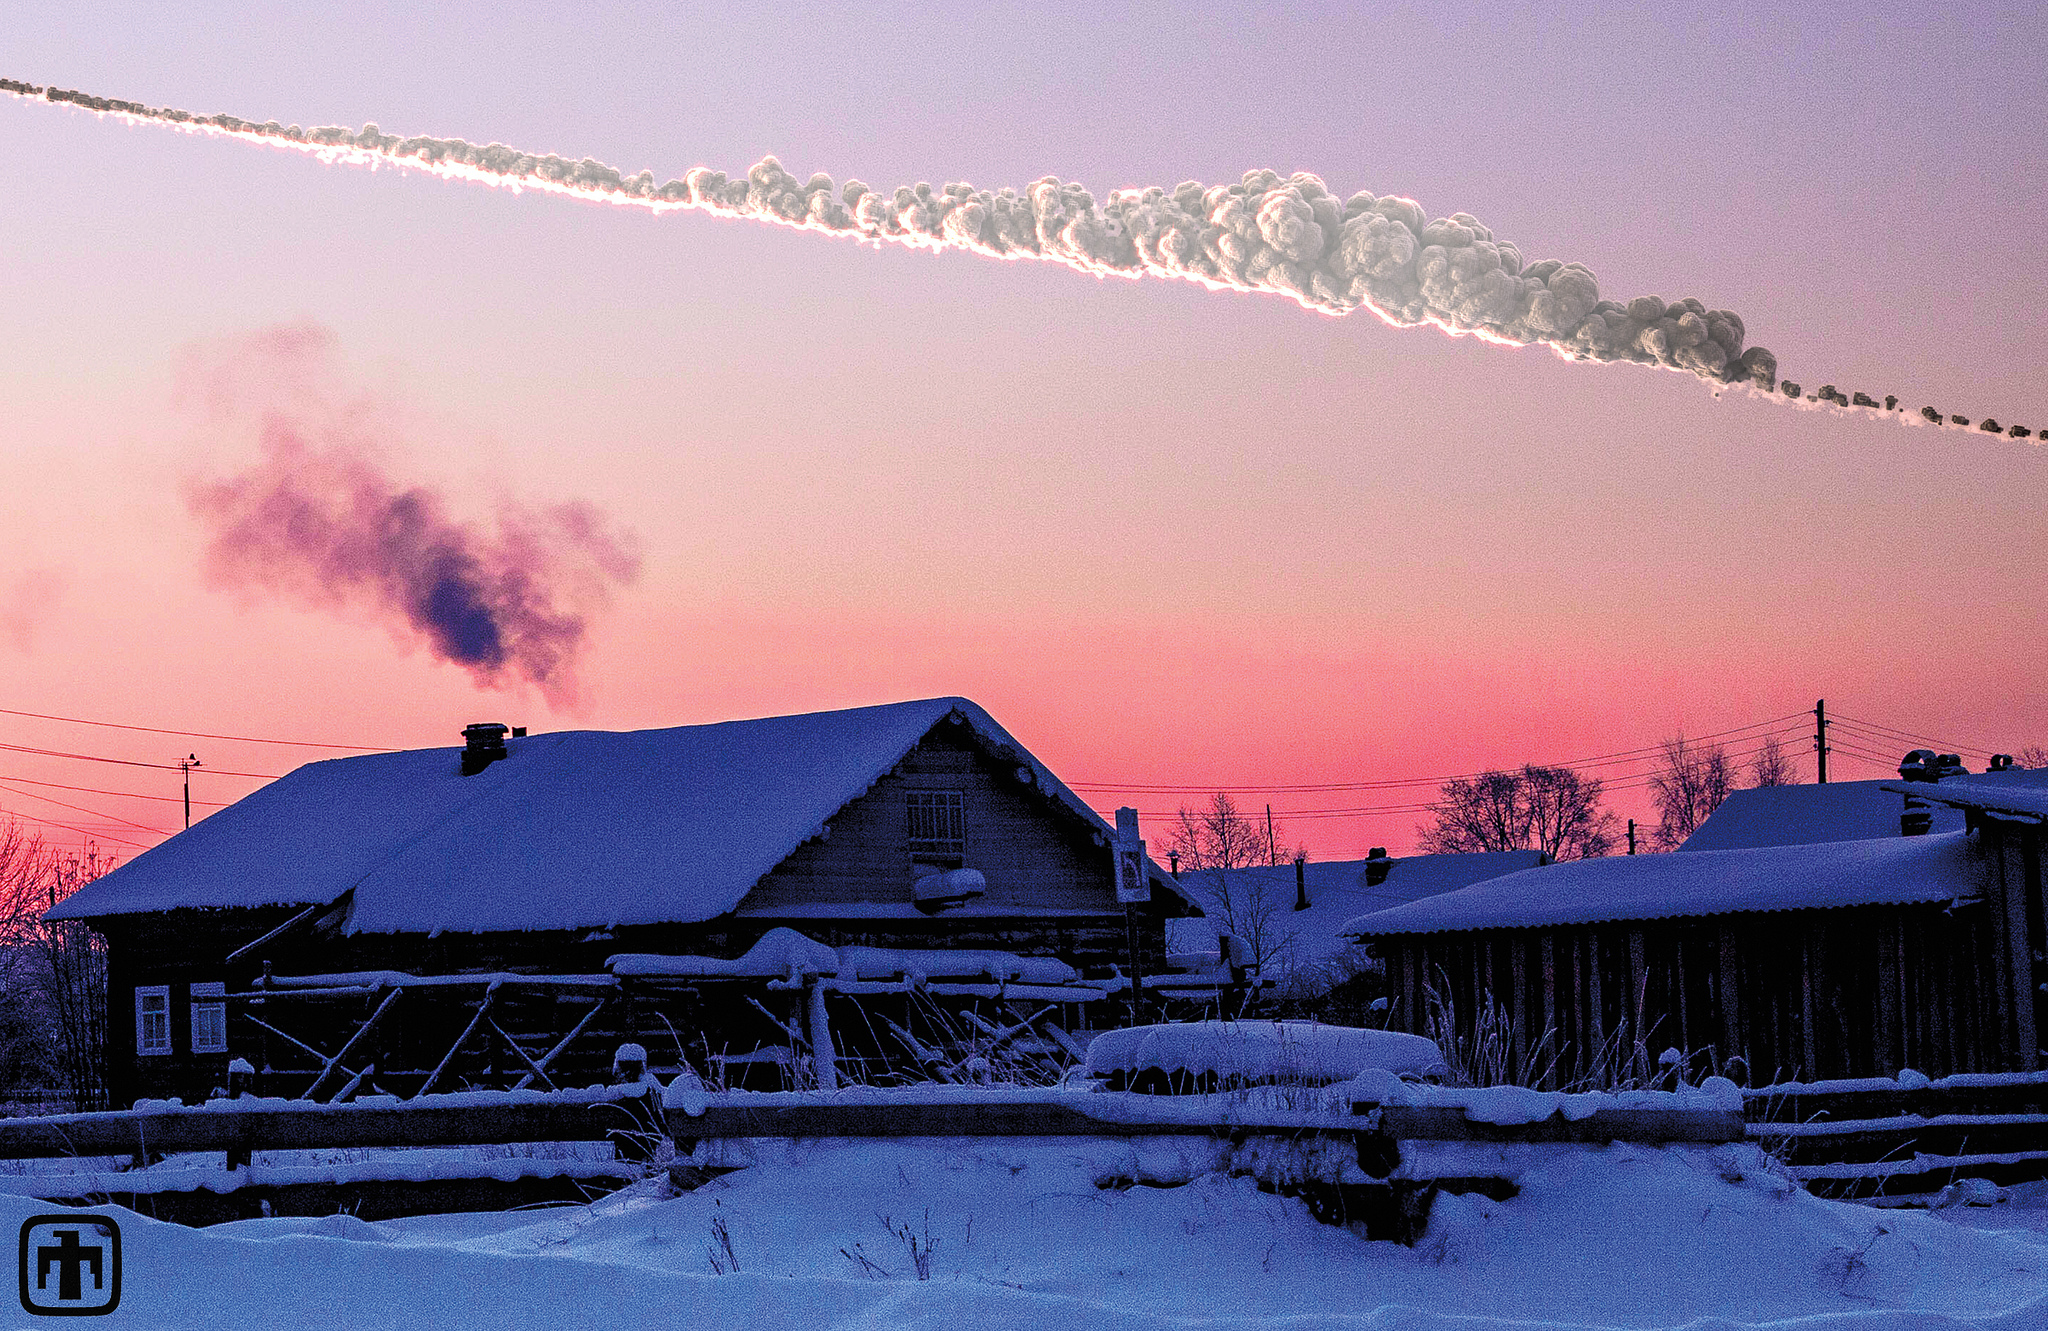 Chelyabinsk Meteor A WakeUp Call for Earth Space